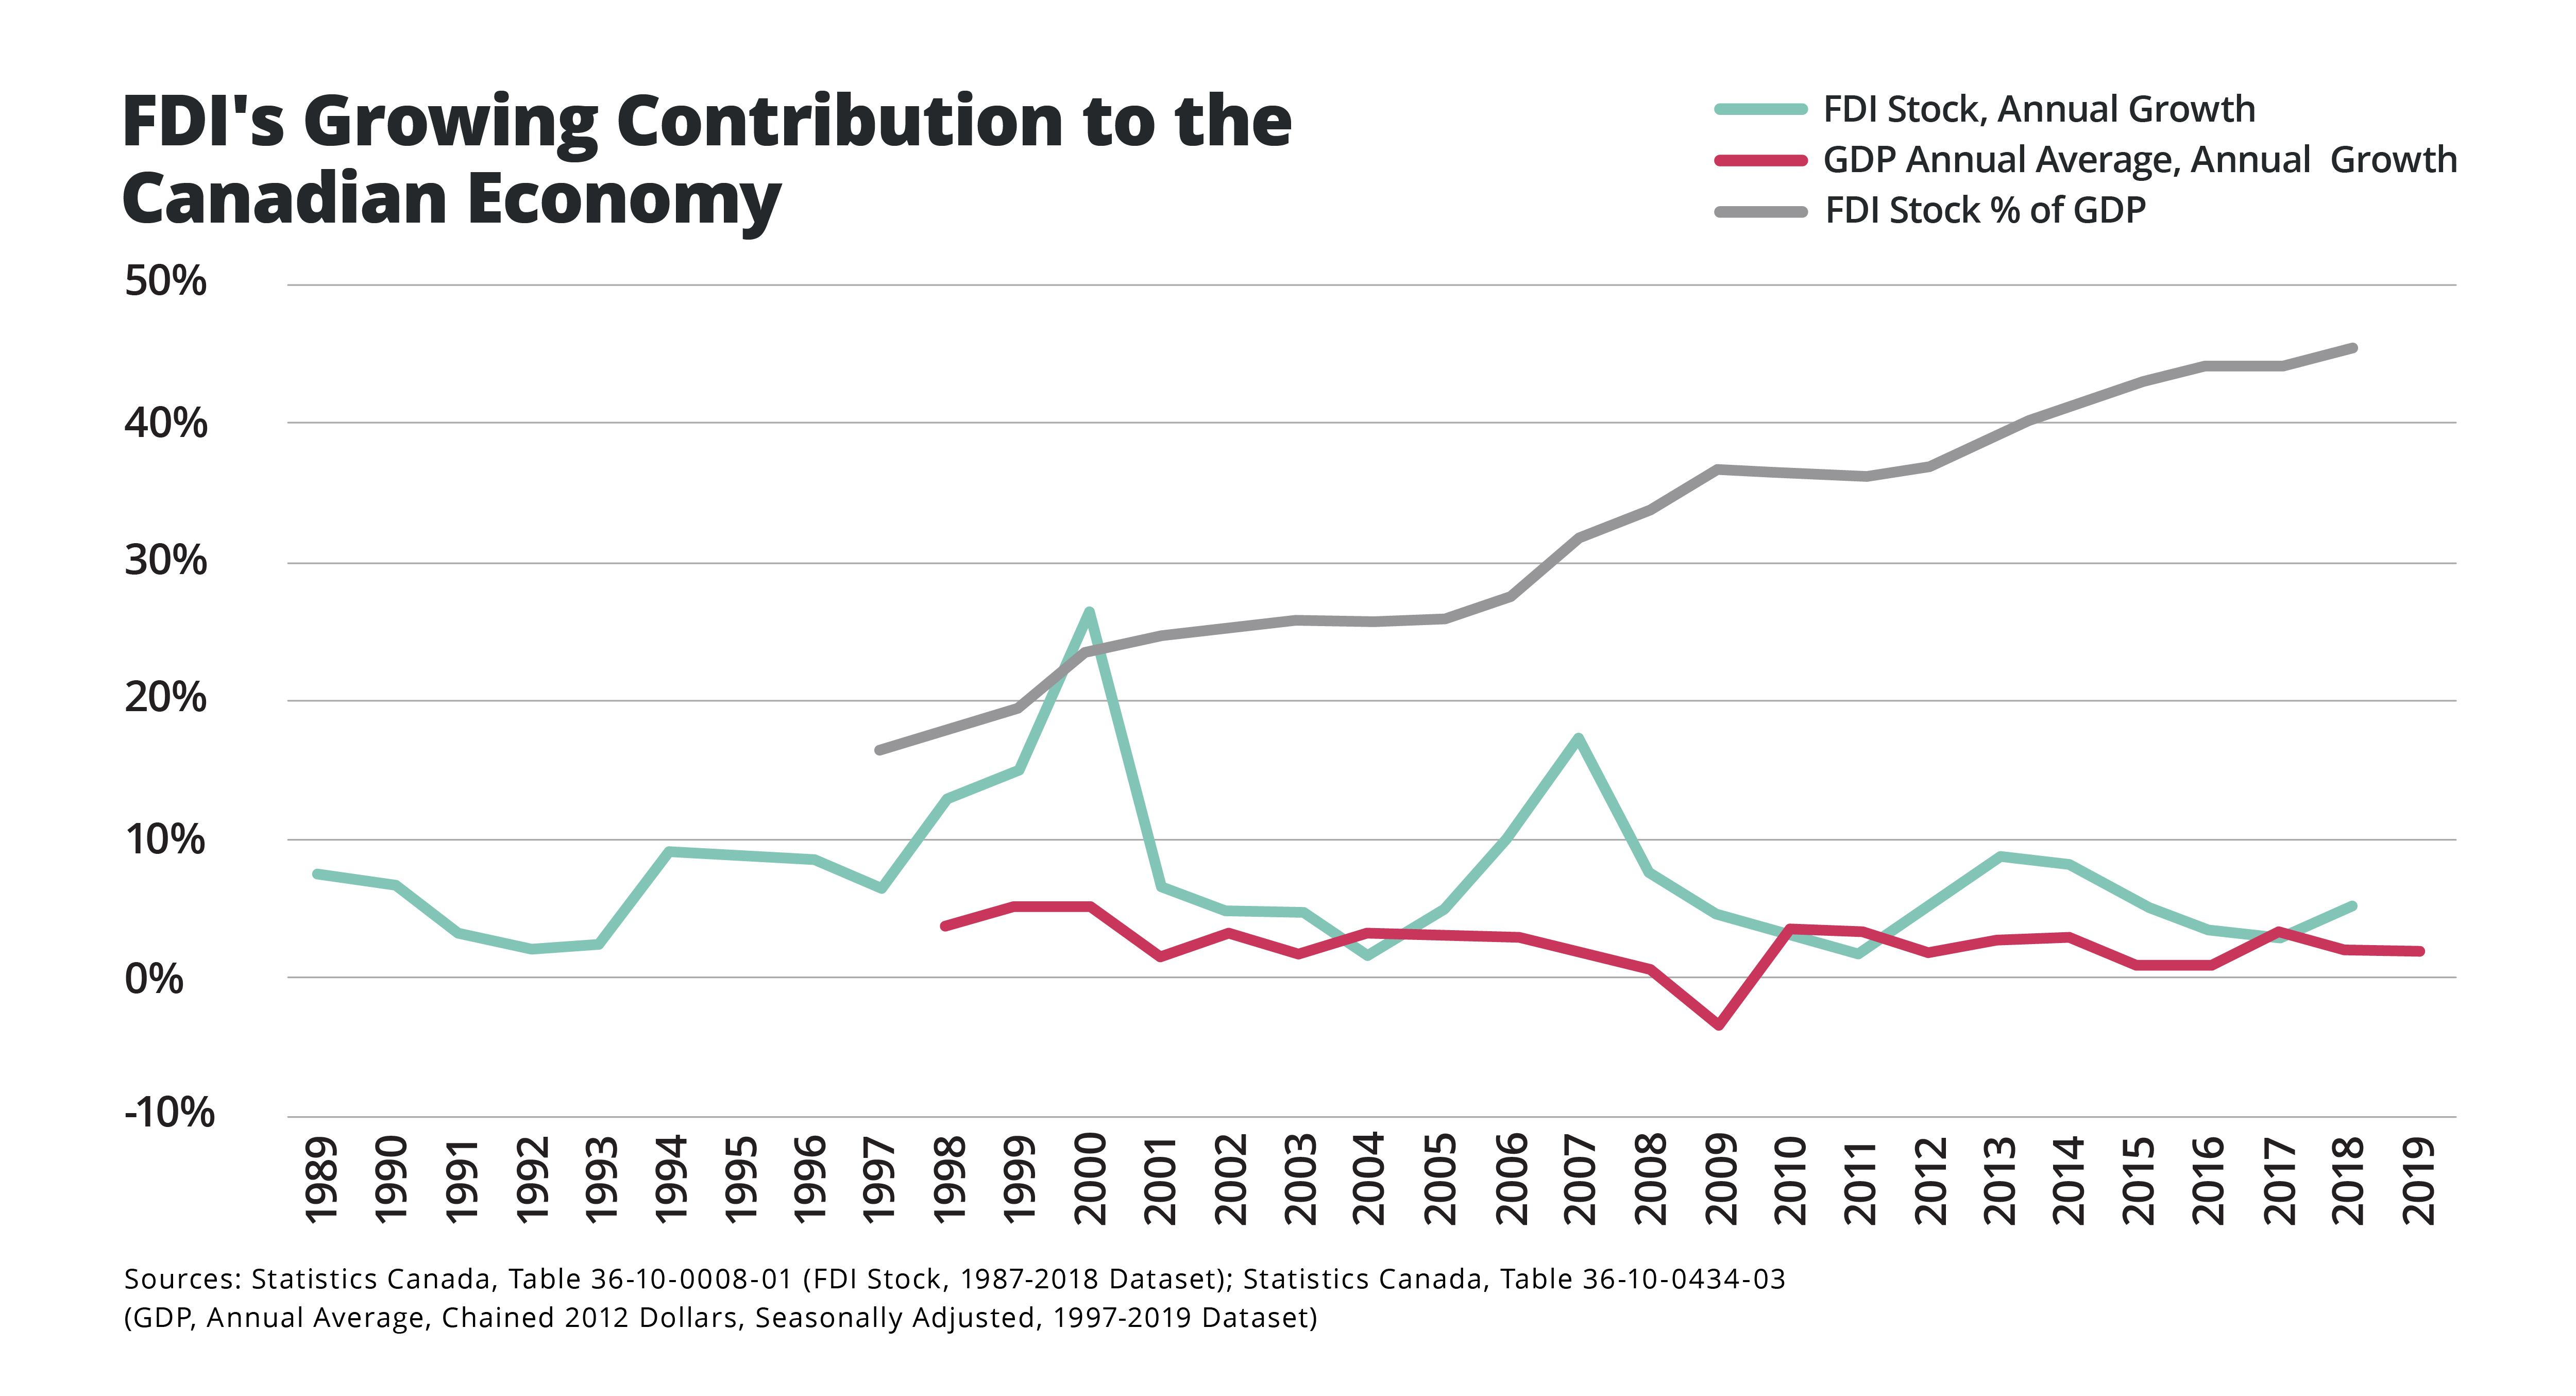 FDI's growing contribution to the Canadian Economy